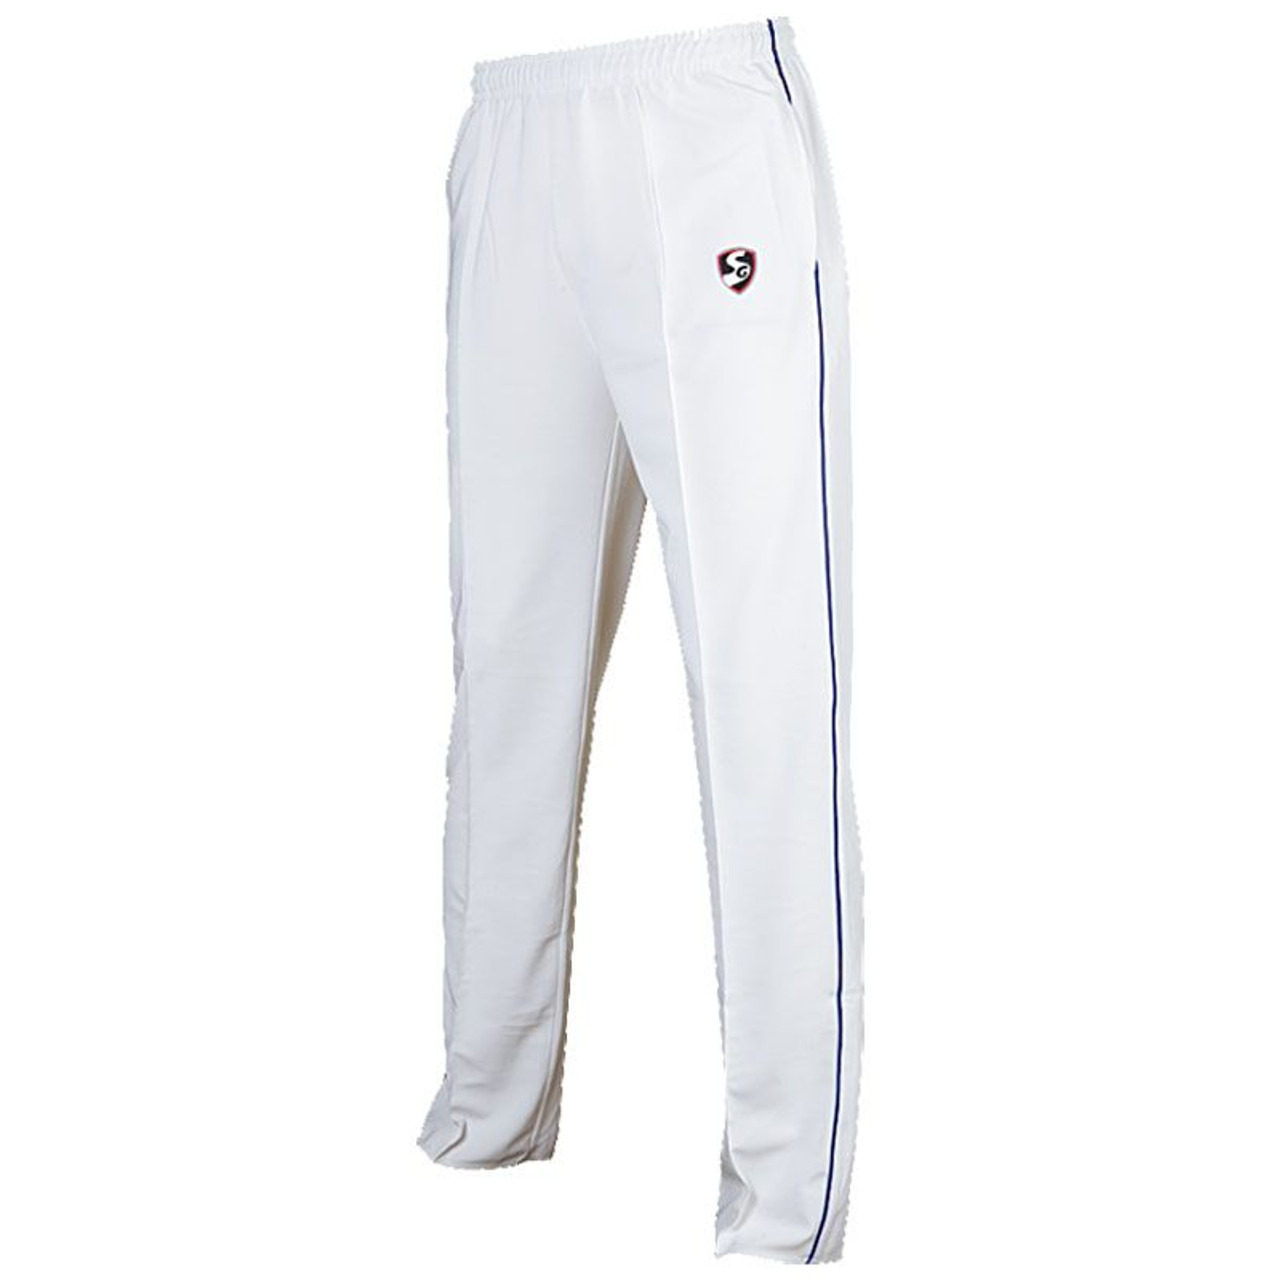 SG Cricket Pant SG Legend S Polyester Cricket Pant S OffWhite   Amazonin Clothing  Accessories